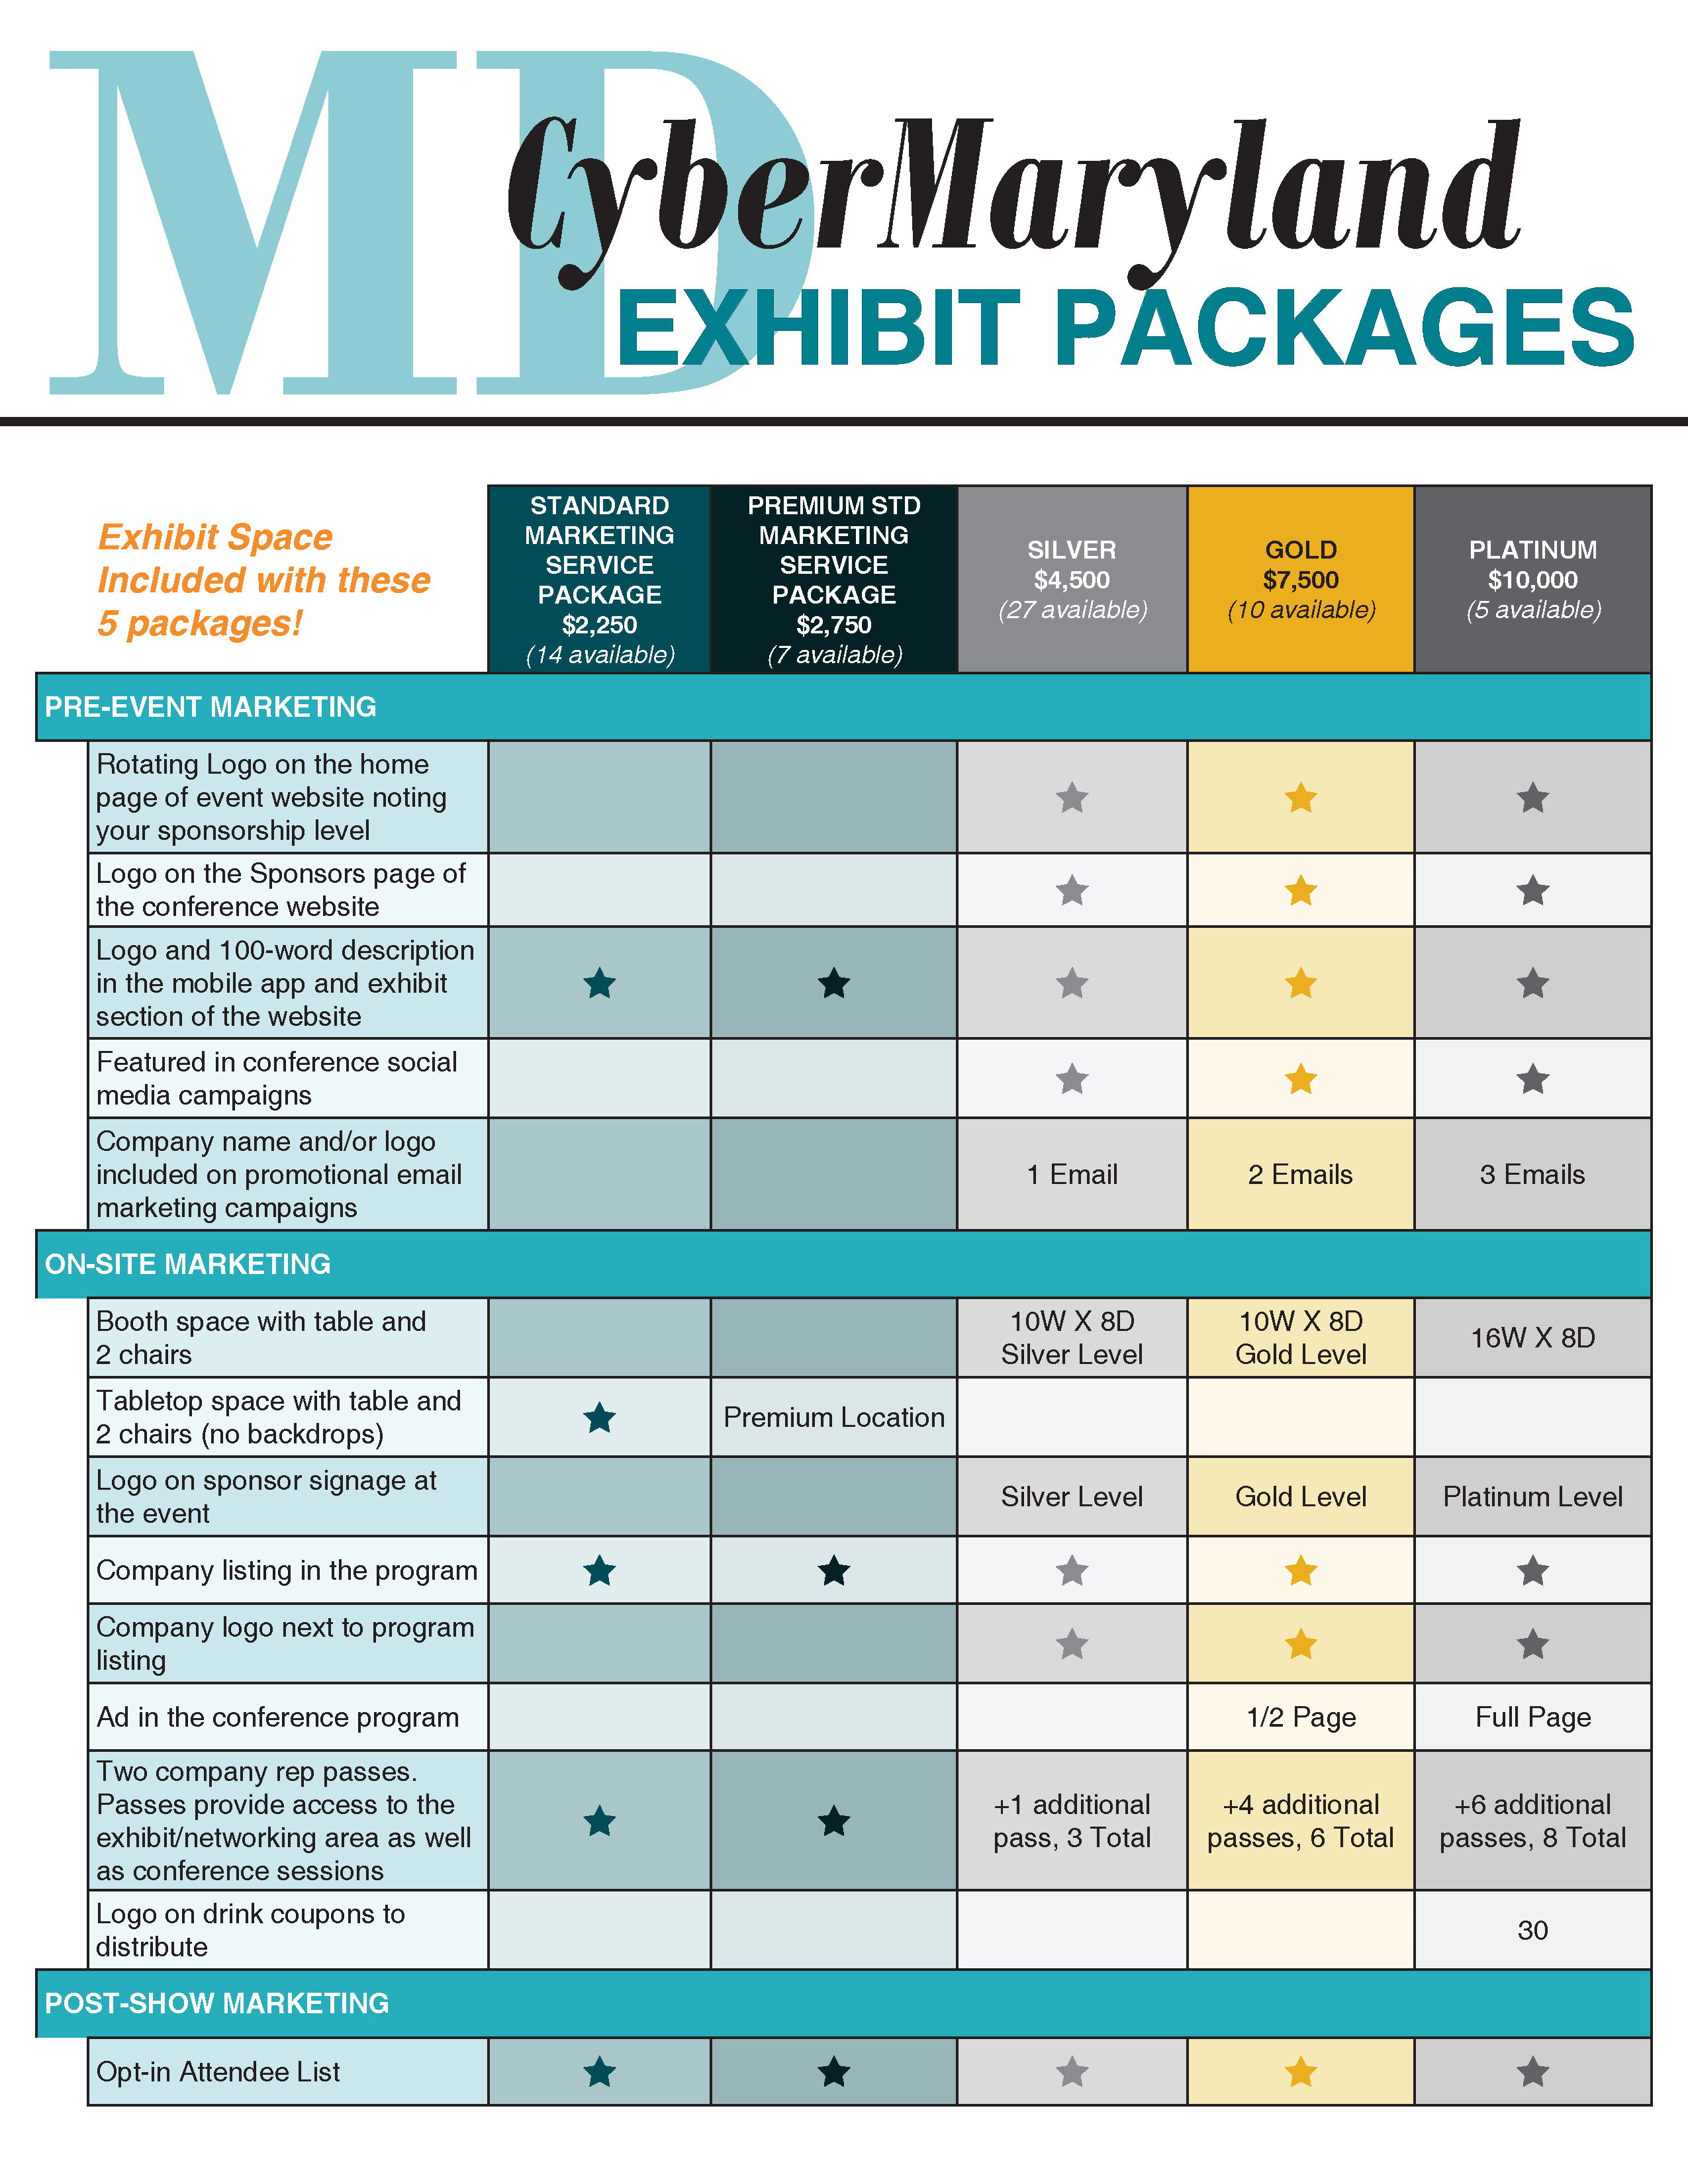 Exhibit Packages